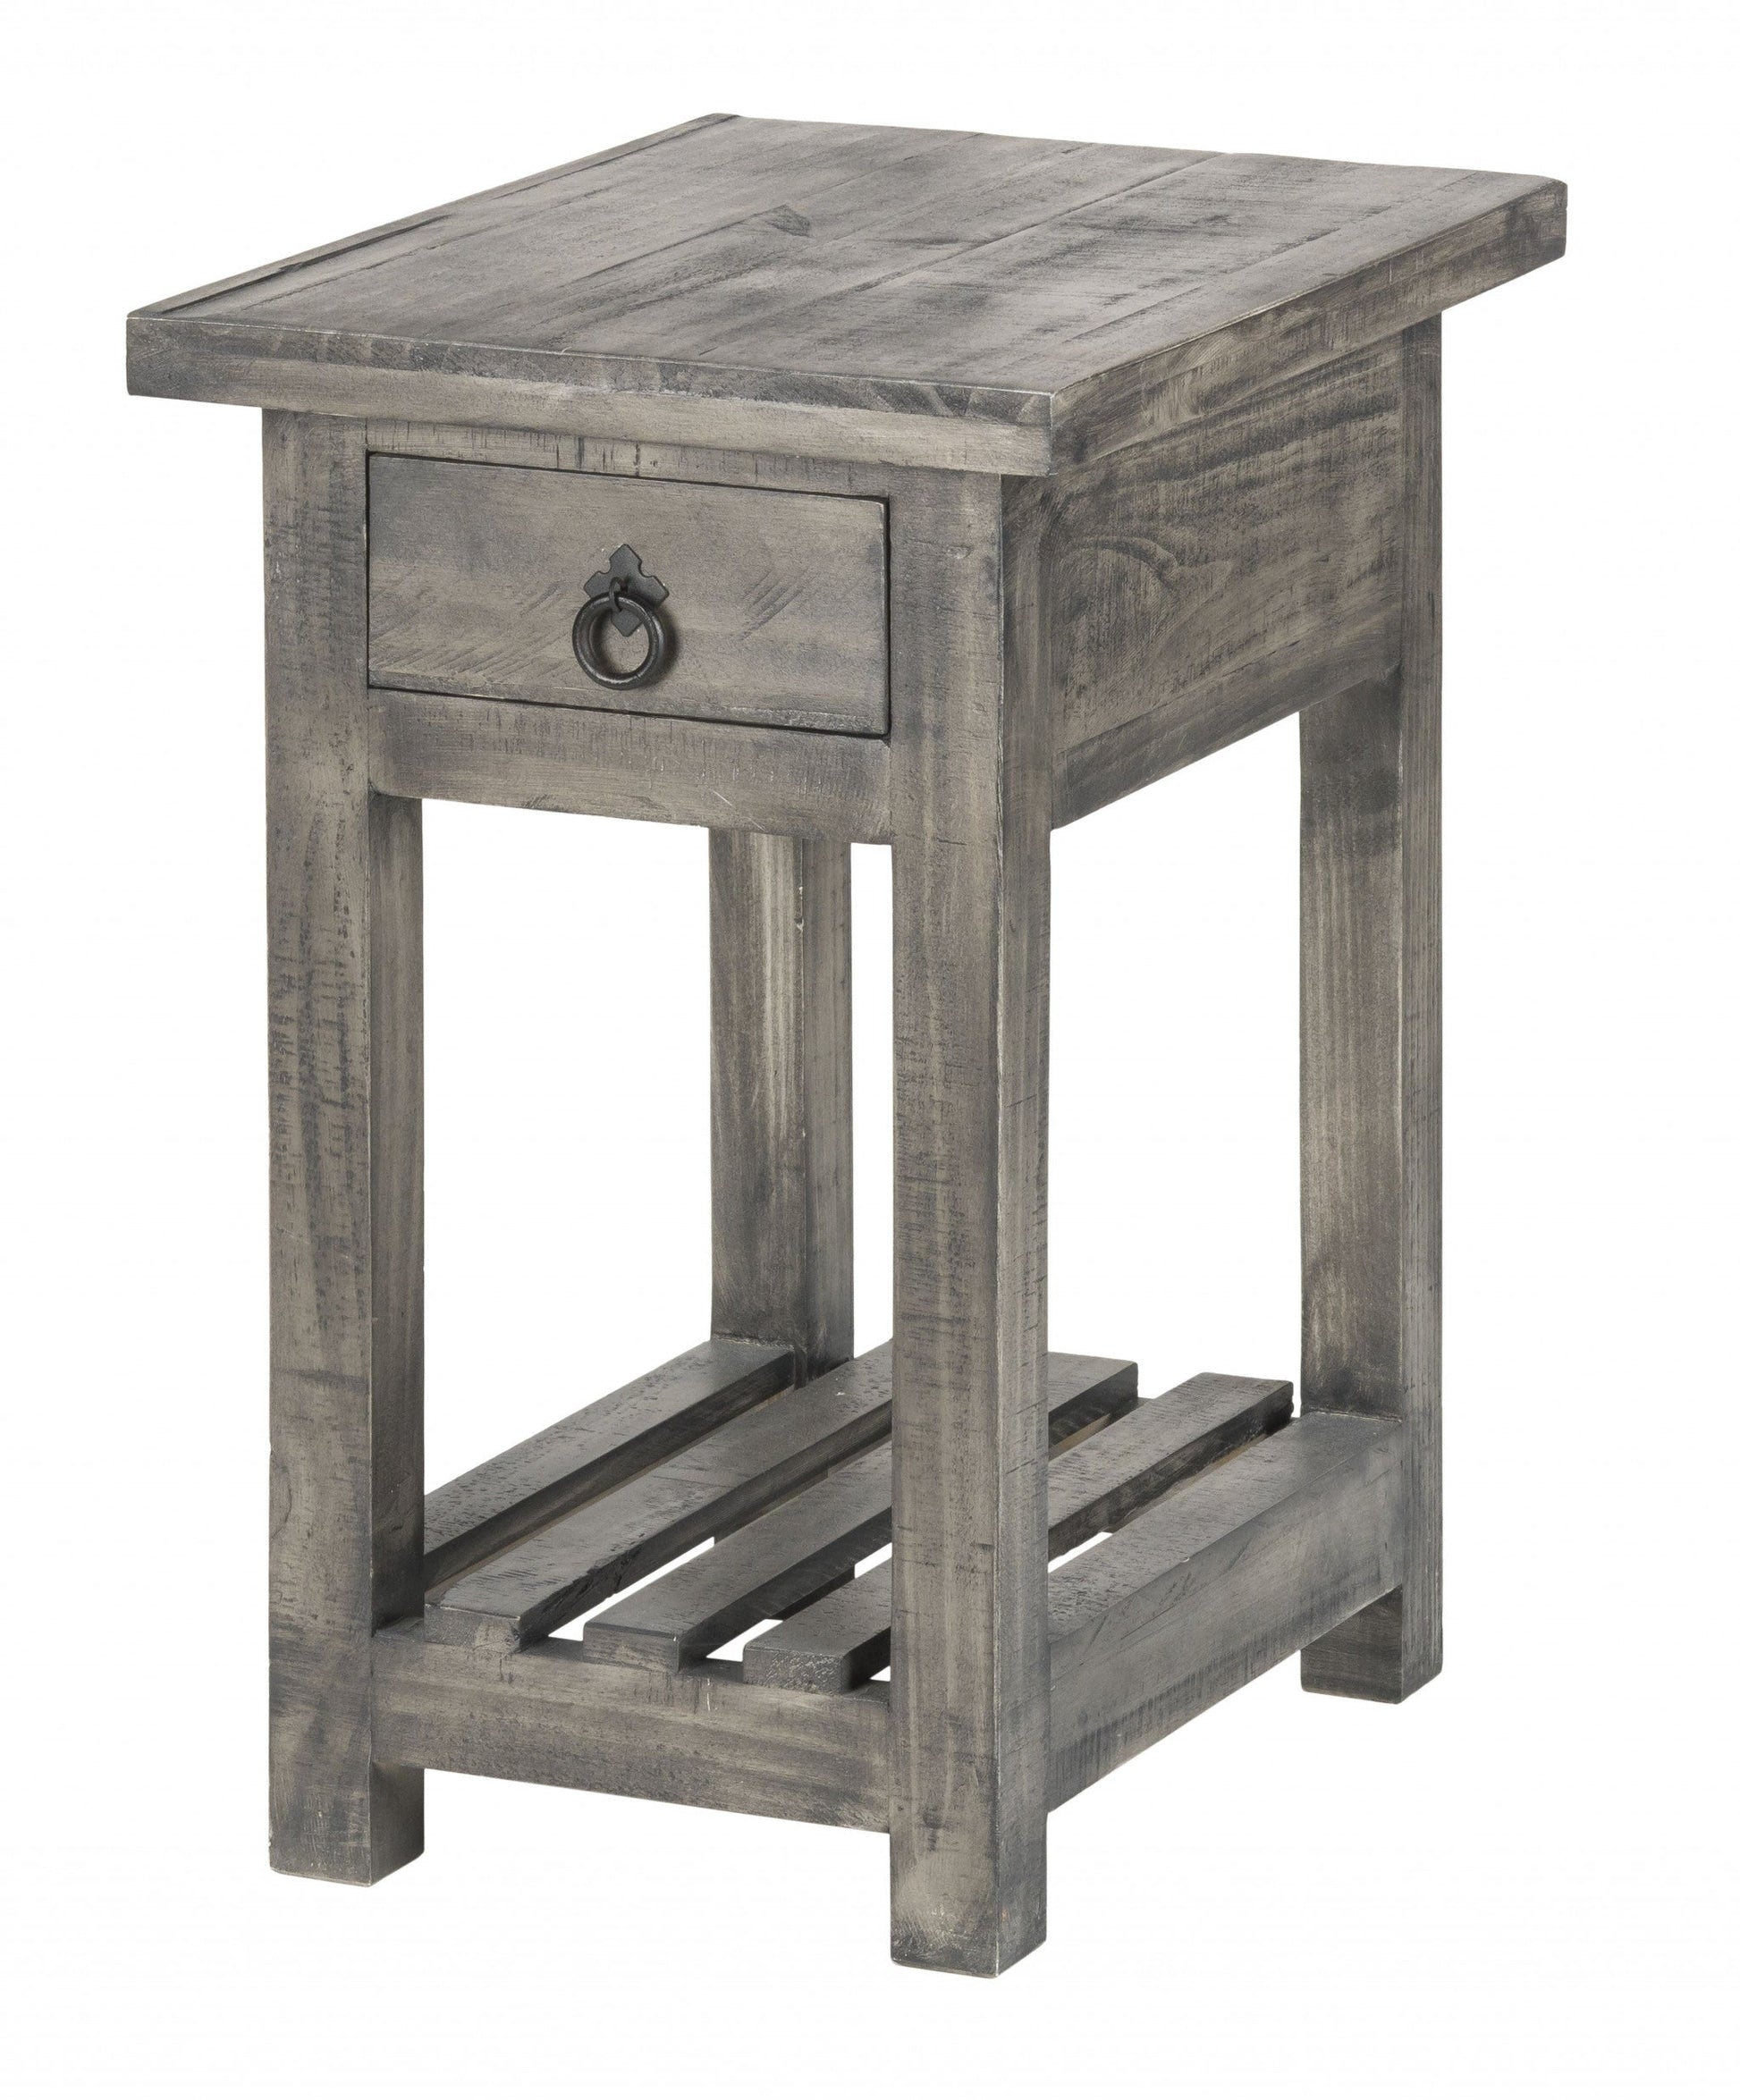 HomeRoots Rustic Gray Wash Wooden End Table with Storage